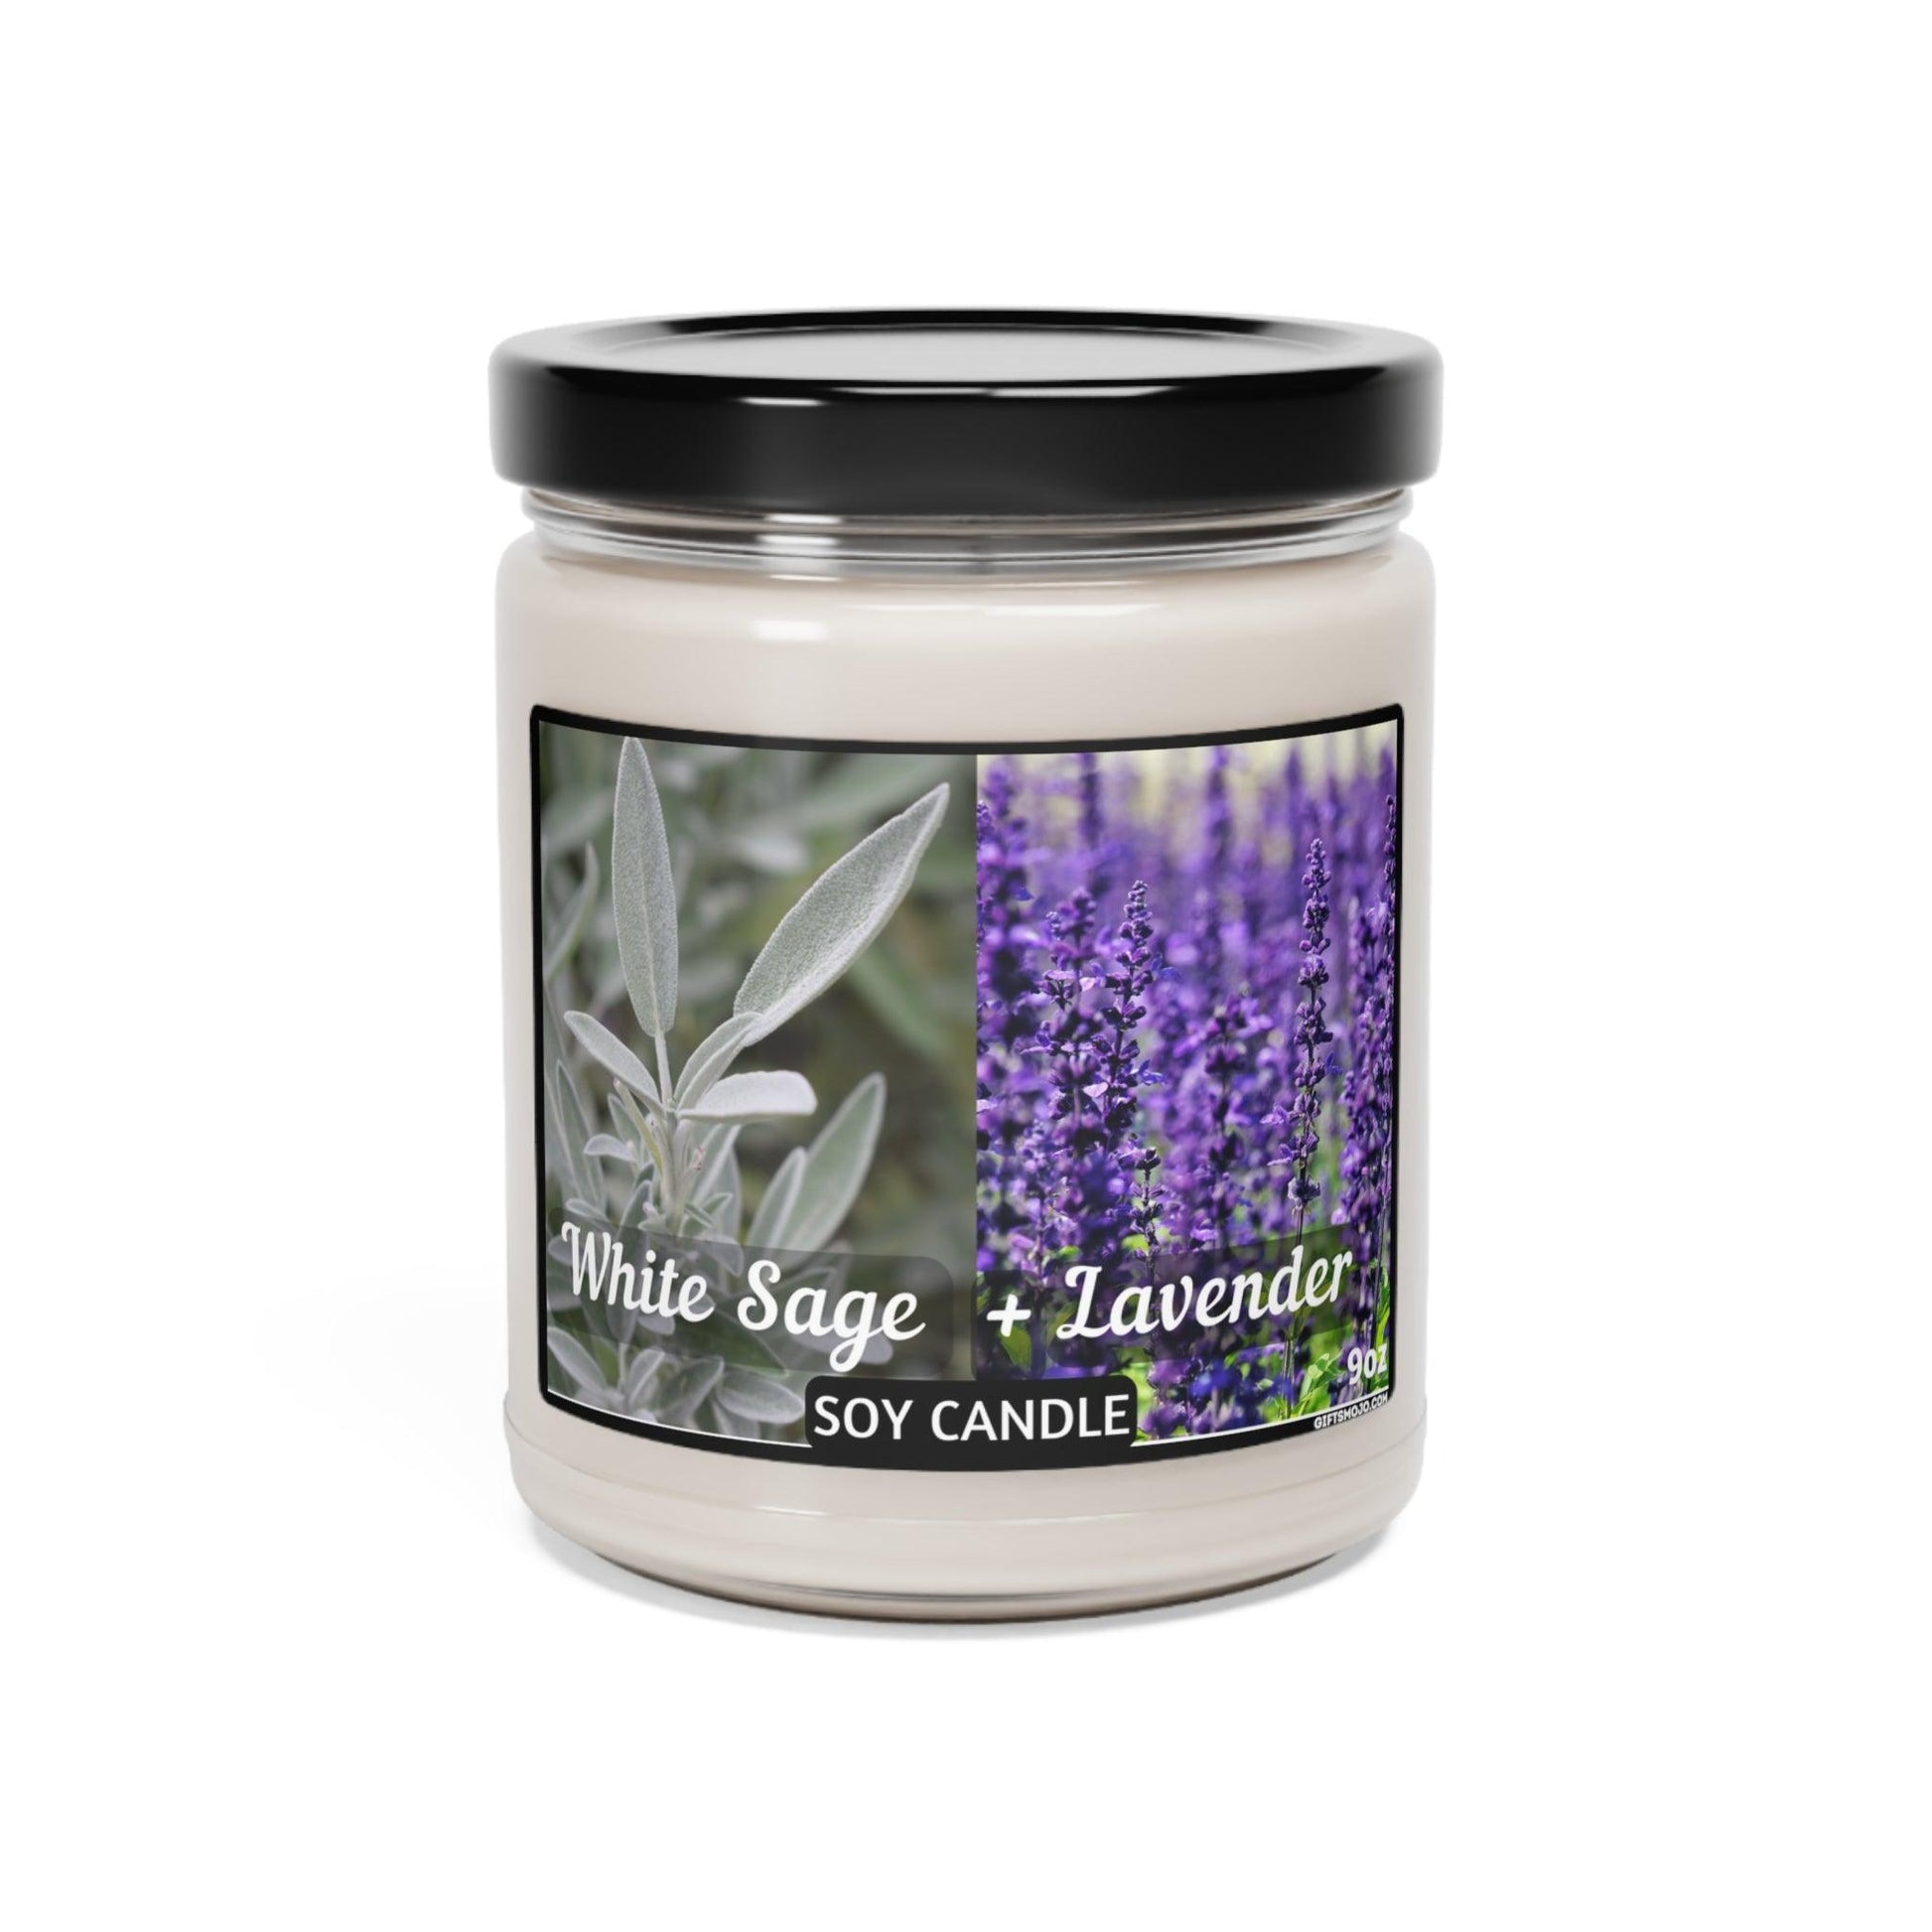 Scented Soy Candle, White Sage Lavender, Cinnamon Vanilla, Apple Harvest, Clean Cotton, Sea Salt Orchid, 9oz, - Giftsmojo